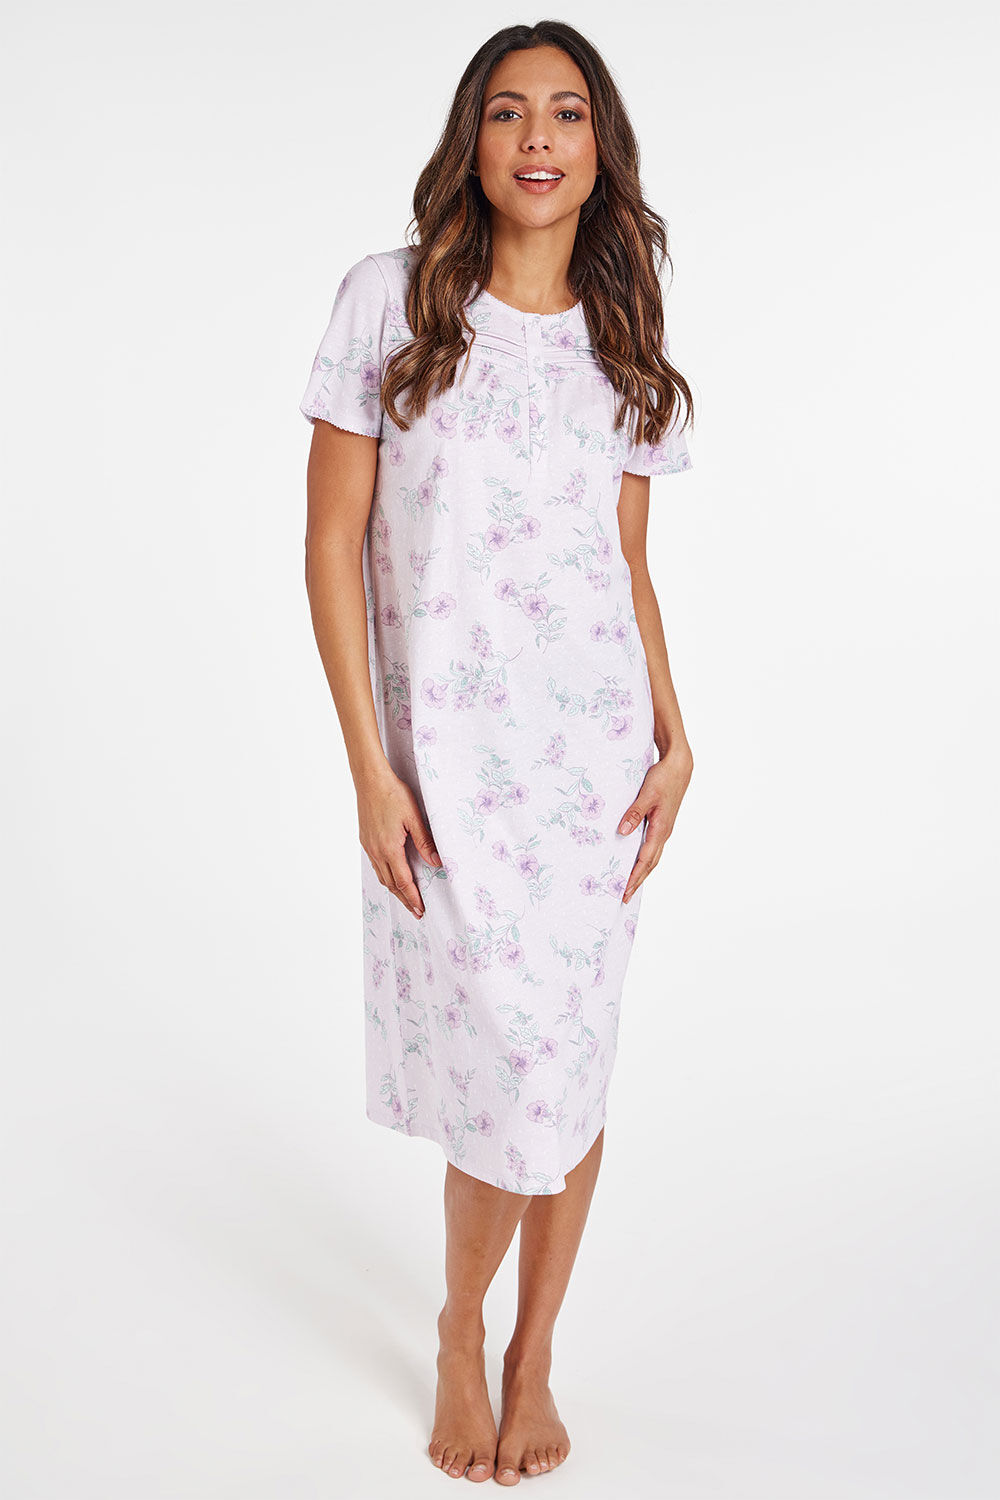 Bonmarche Lilac Short Sleeve Floral and Spot Print Nightdress, Size: 20-22